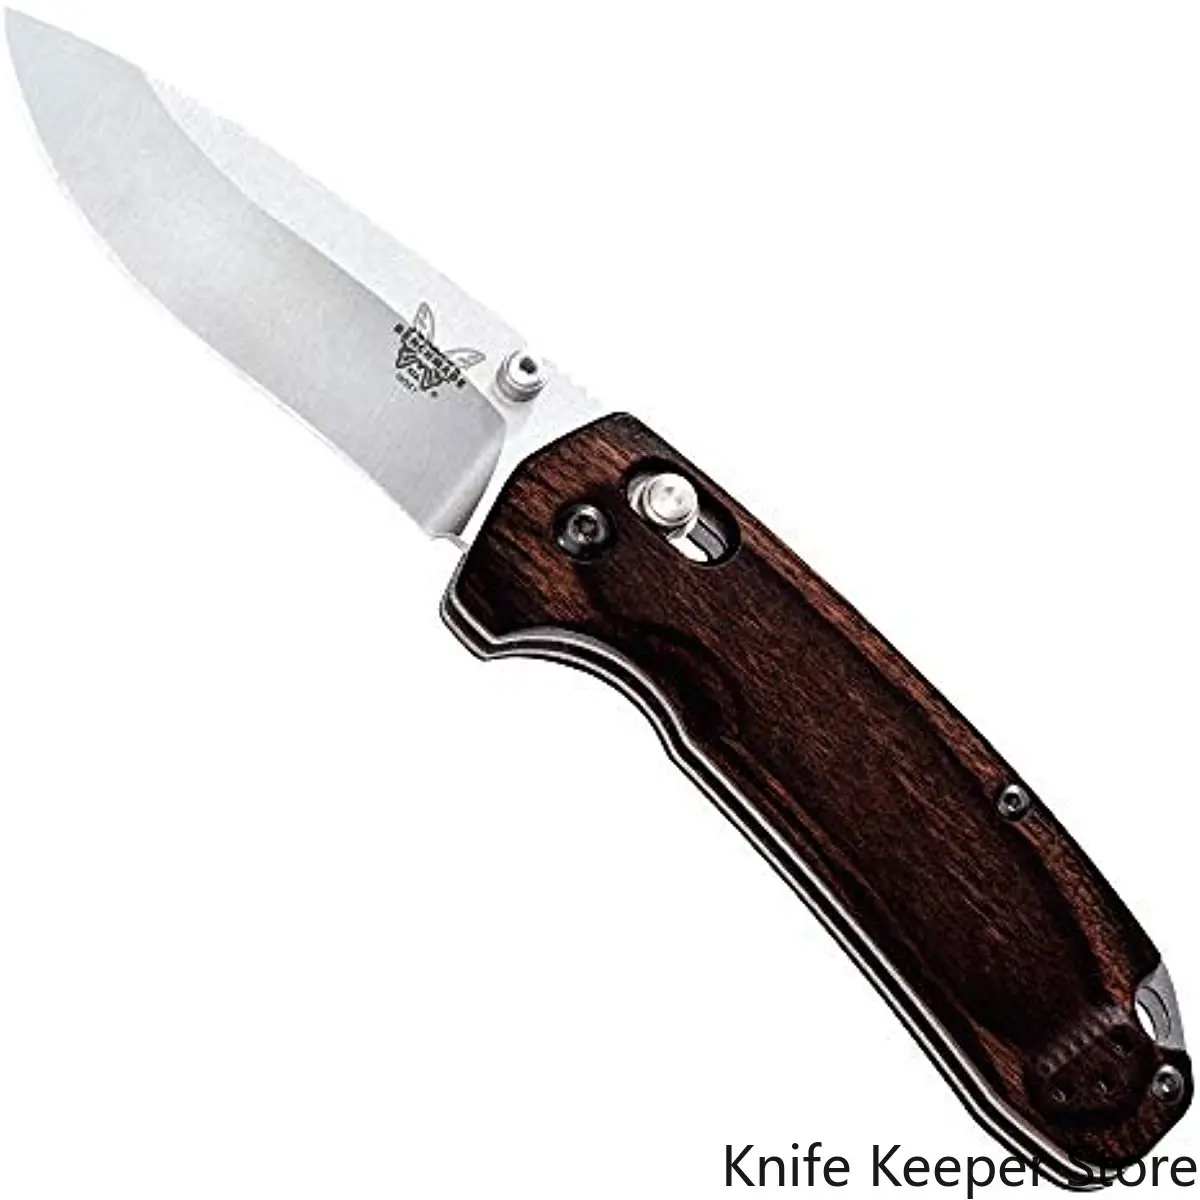 

Benchmade North Fork 15031-1 Knife Drop-Point Blade Folding Knife High Hardness Sharp Collection Outdoor Camping Knife